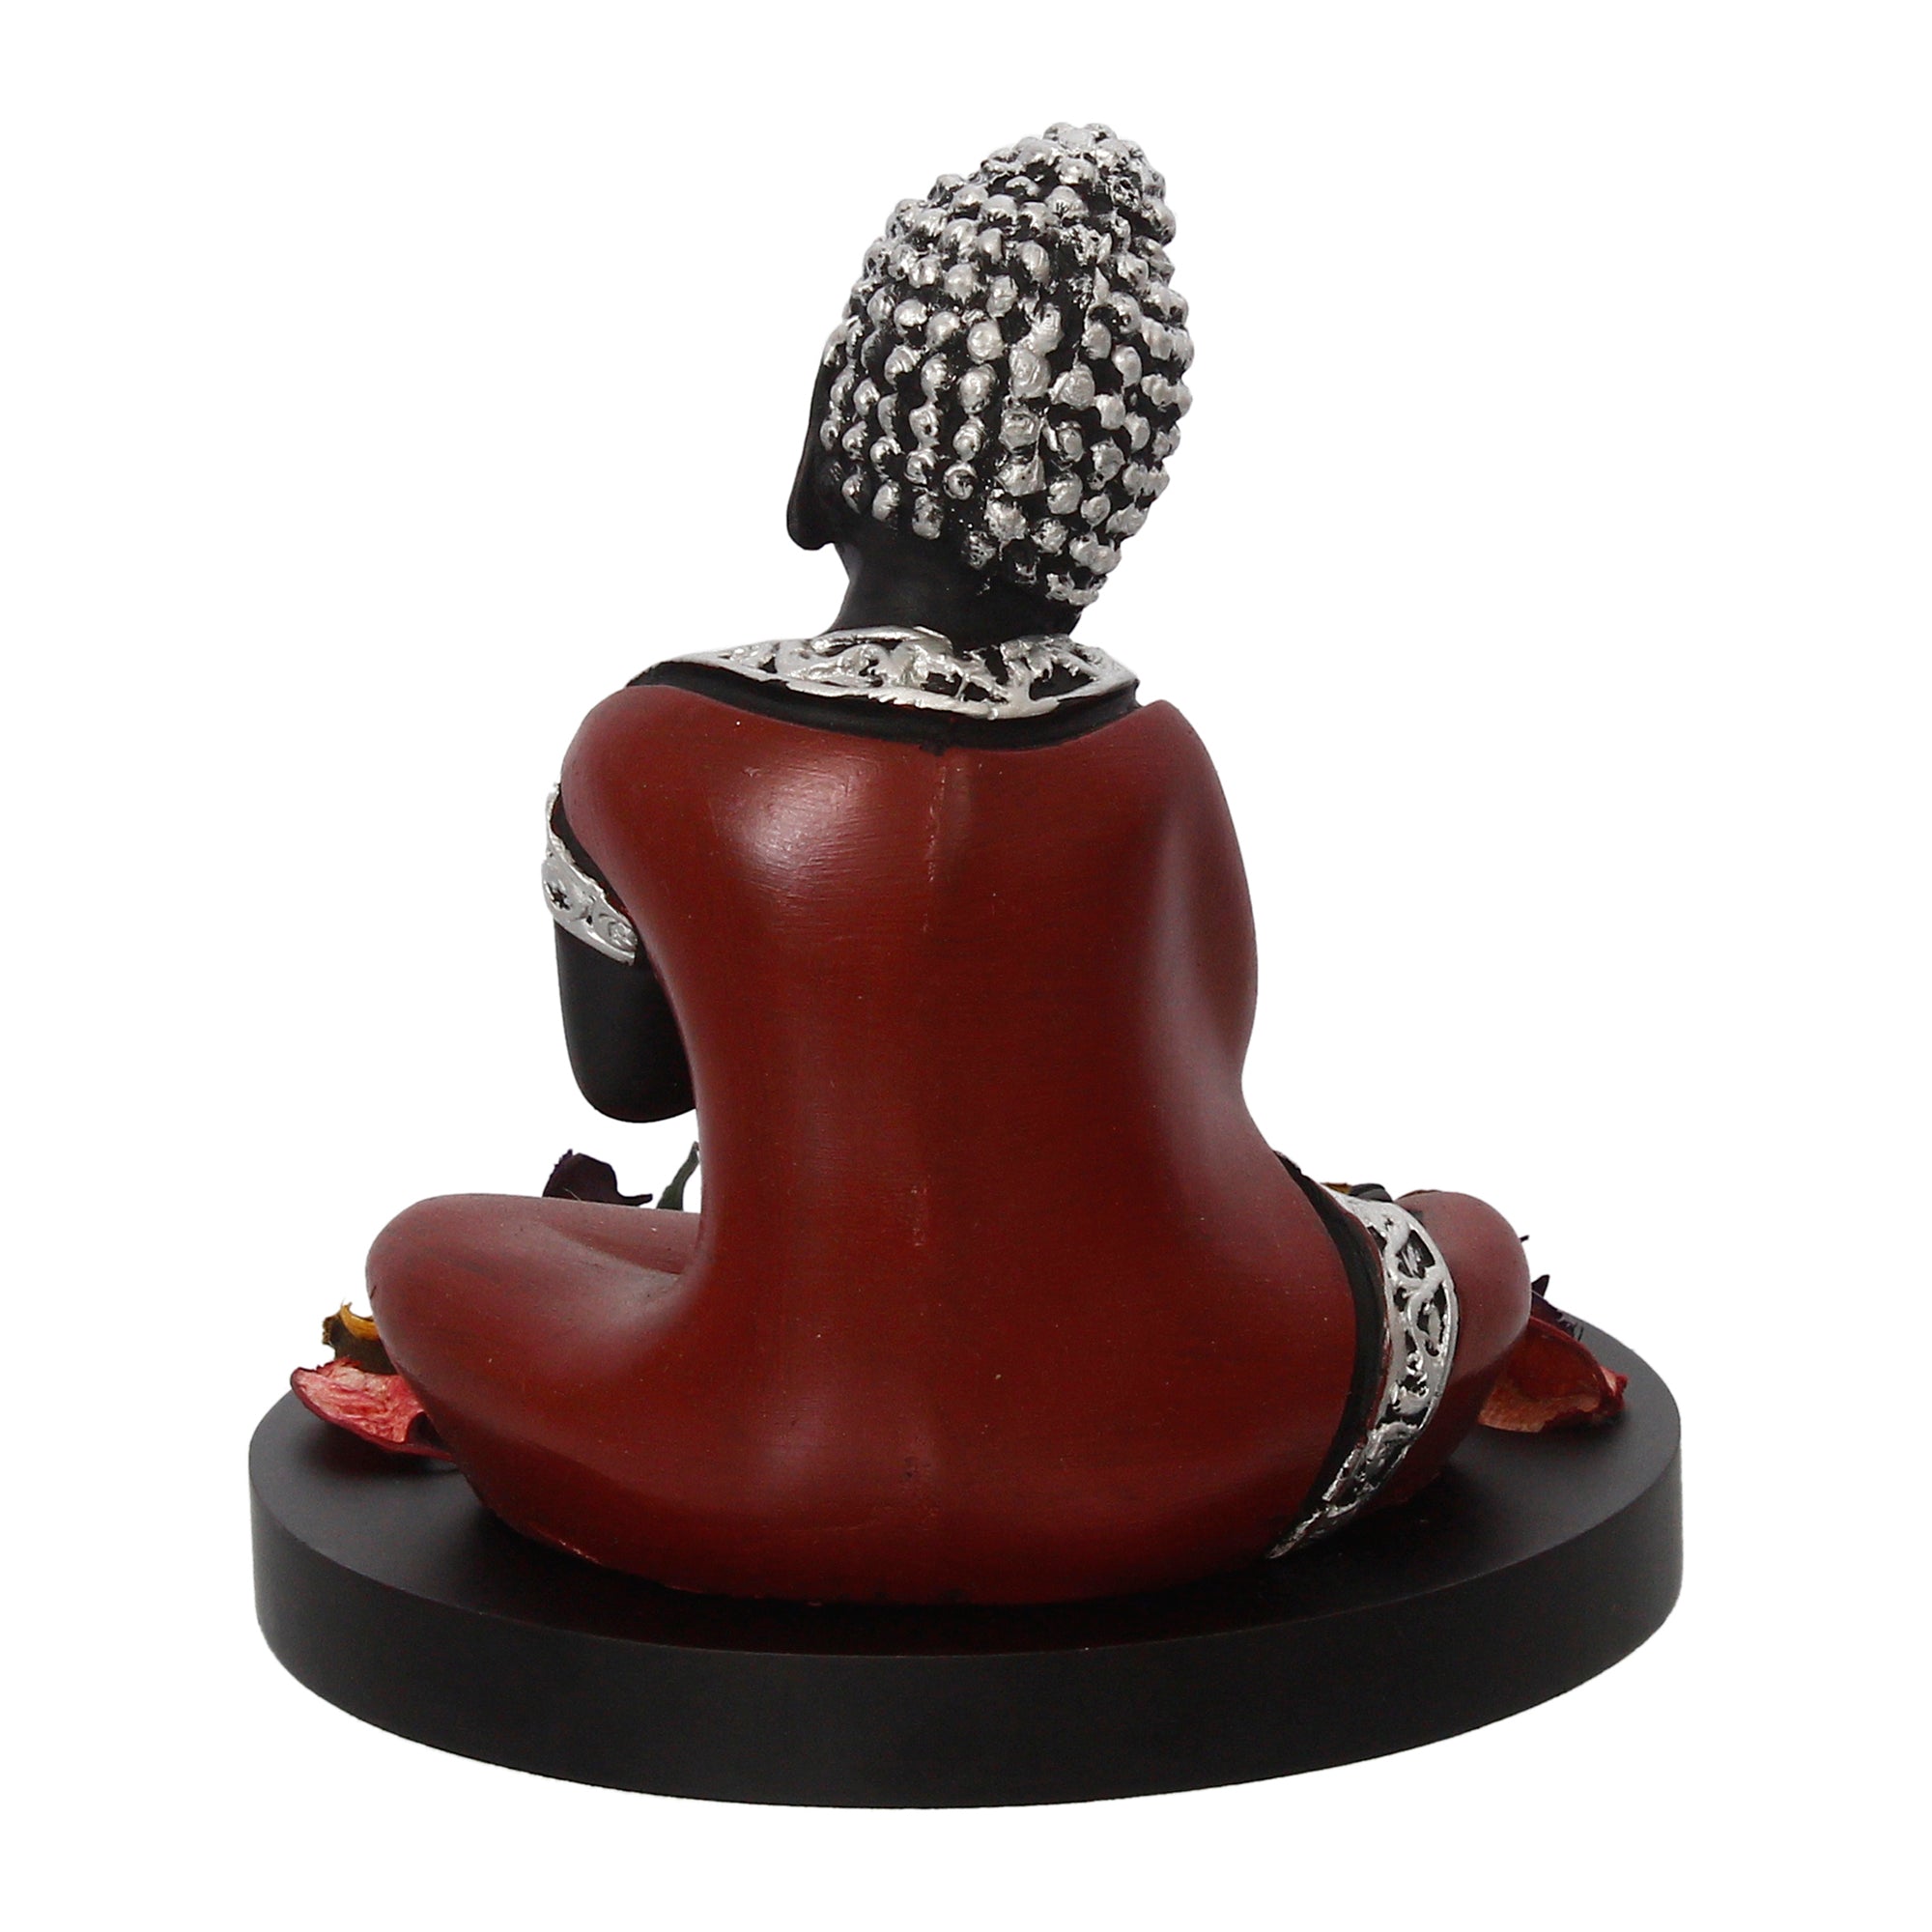 Polyresin Antique Finish Handcrafted Thinking Buddha Statue with Wooden Base, Fragranced Petals and Tealight (Red, Black and Silver) 6